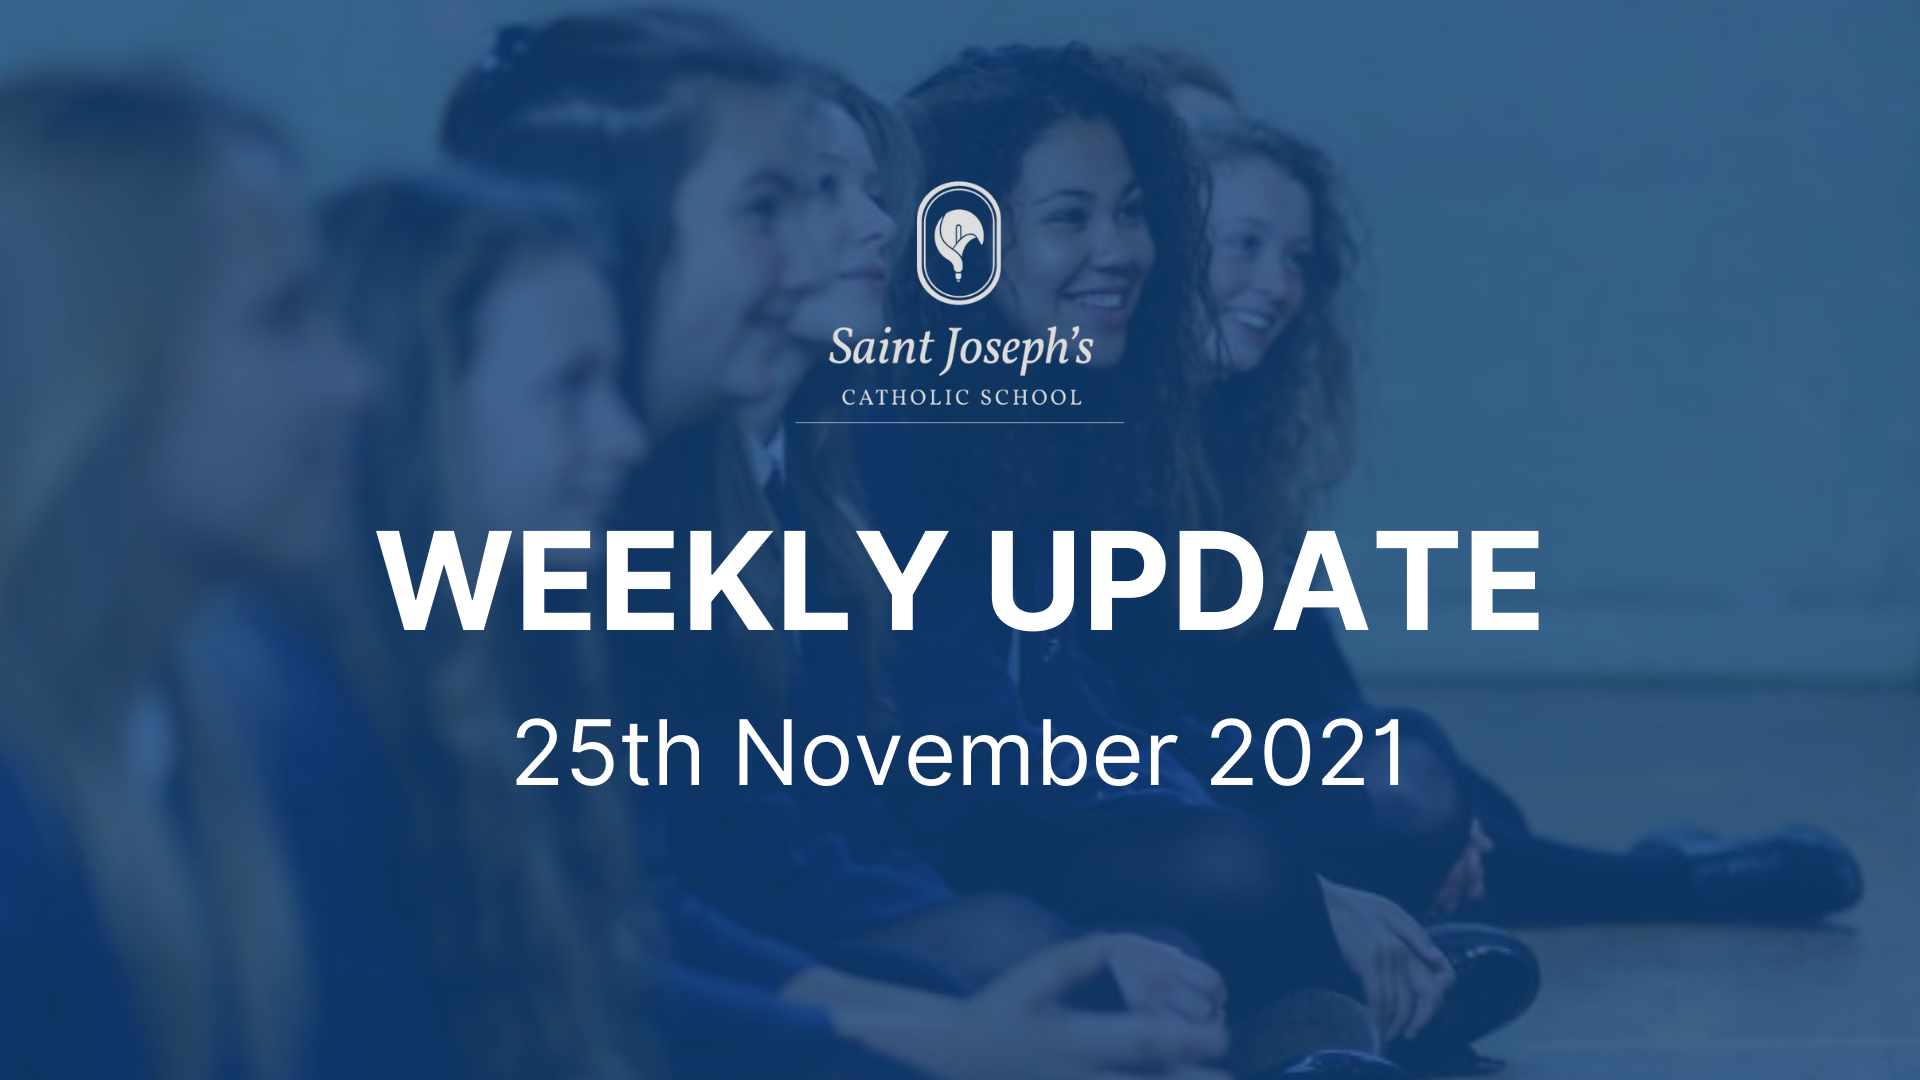 Featured image for “Weekly Update: 25th November 2021”